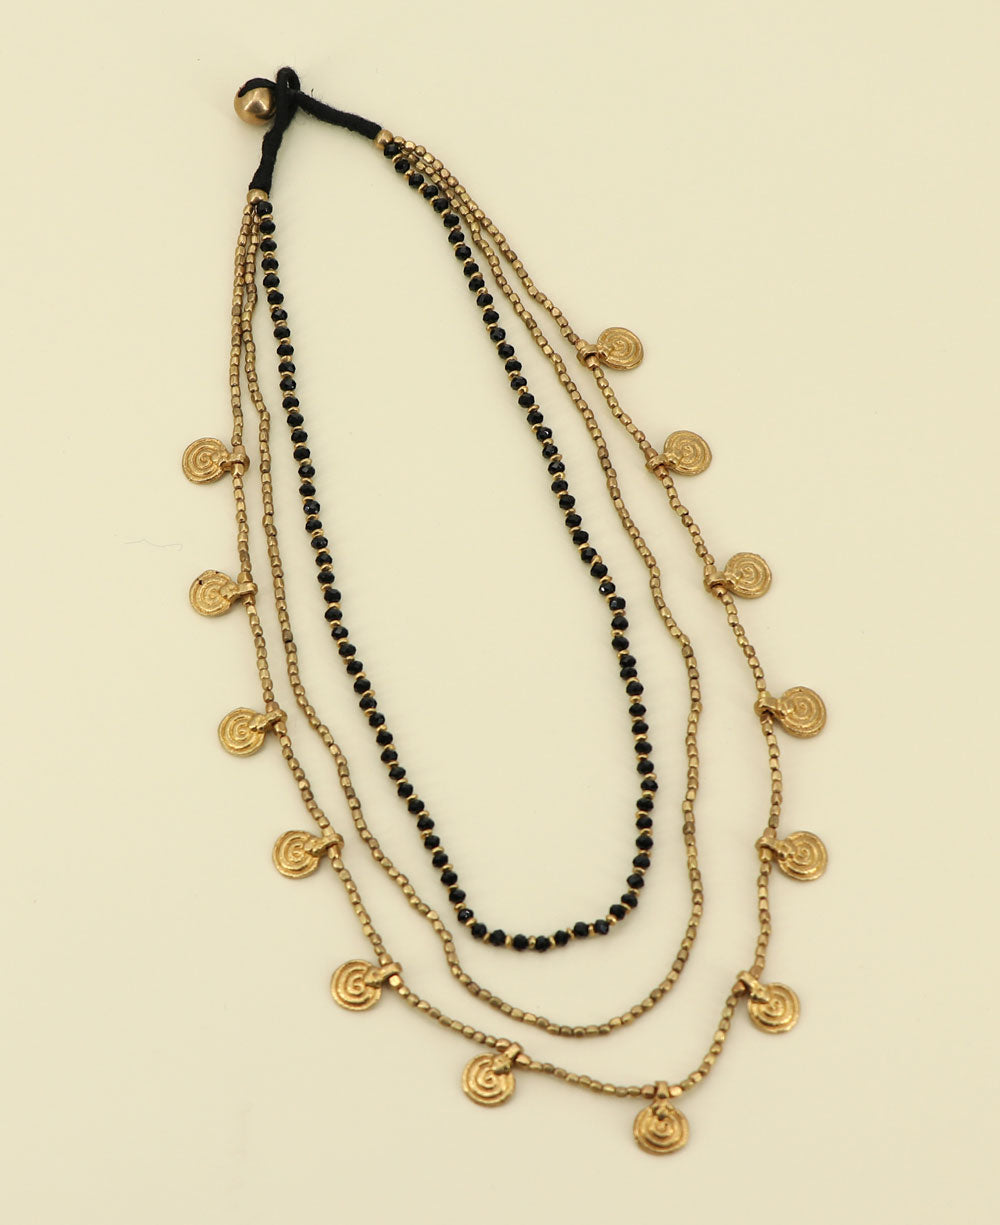 Artisan-crafted triple strand bead necklace